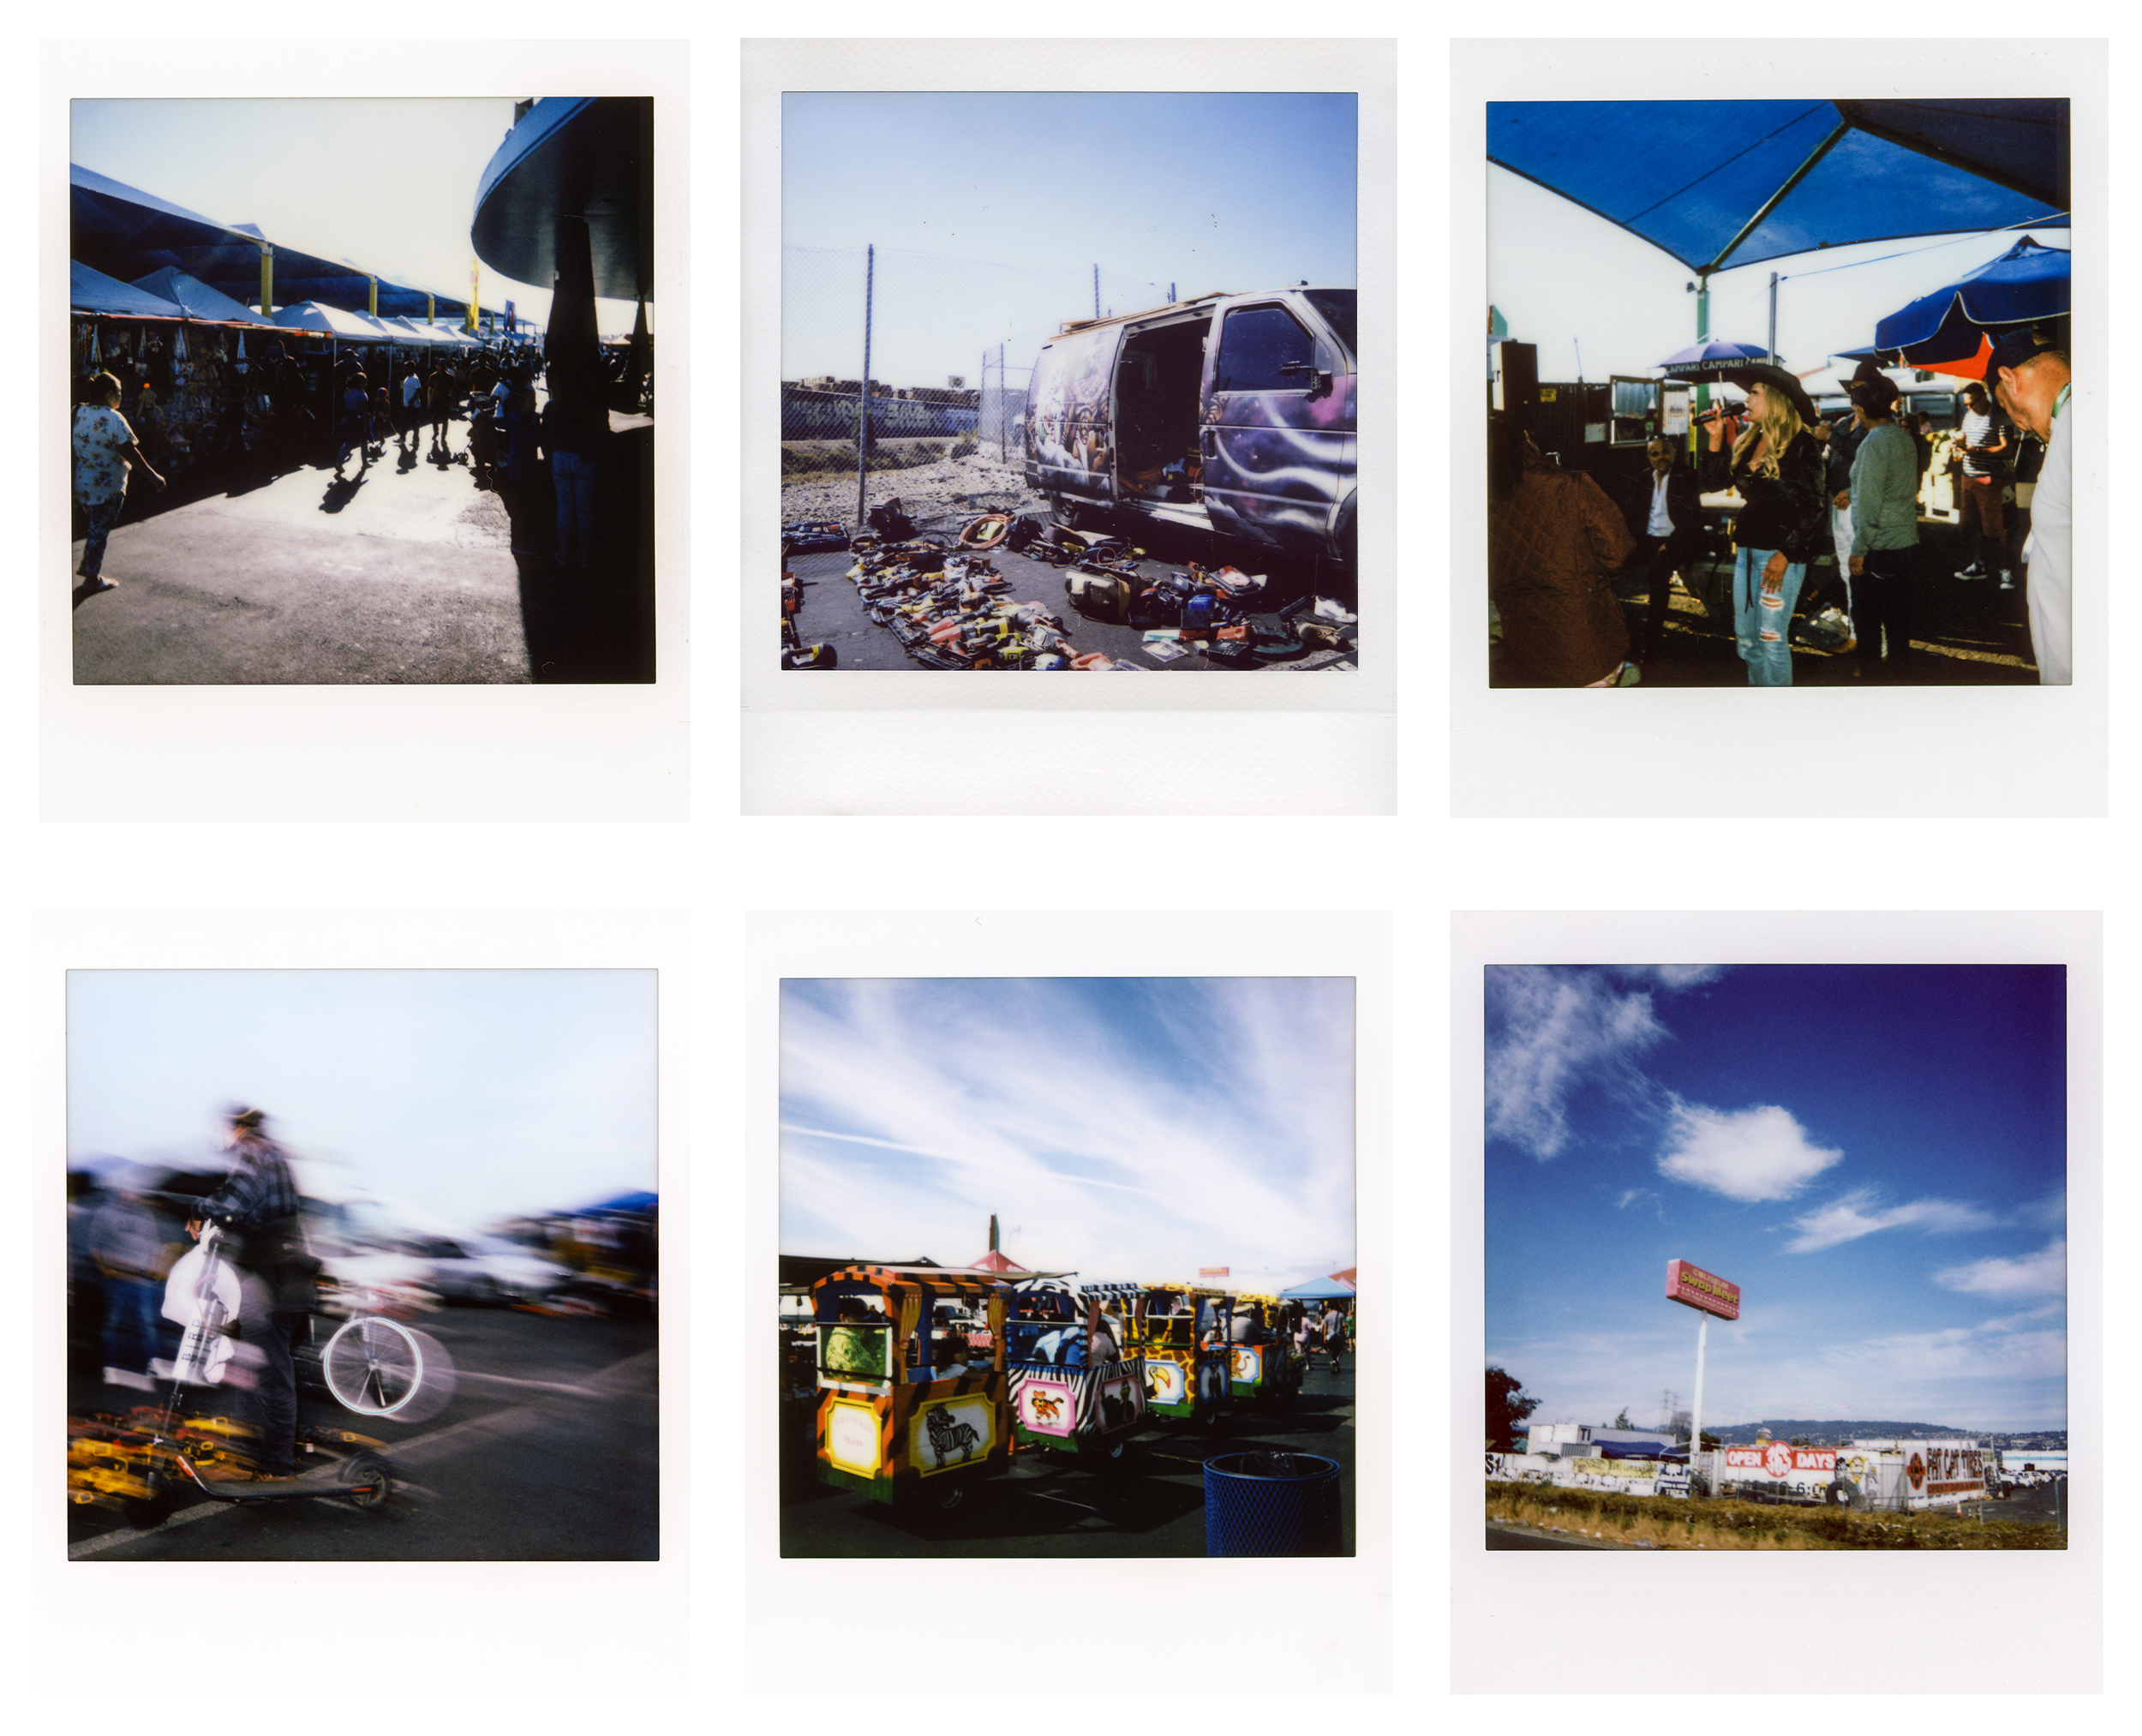 Six instant photos including a woman singing, a series of children's train cars and an outdoor space filled with shopping stalls.